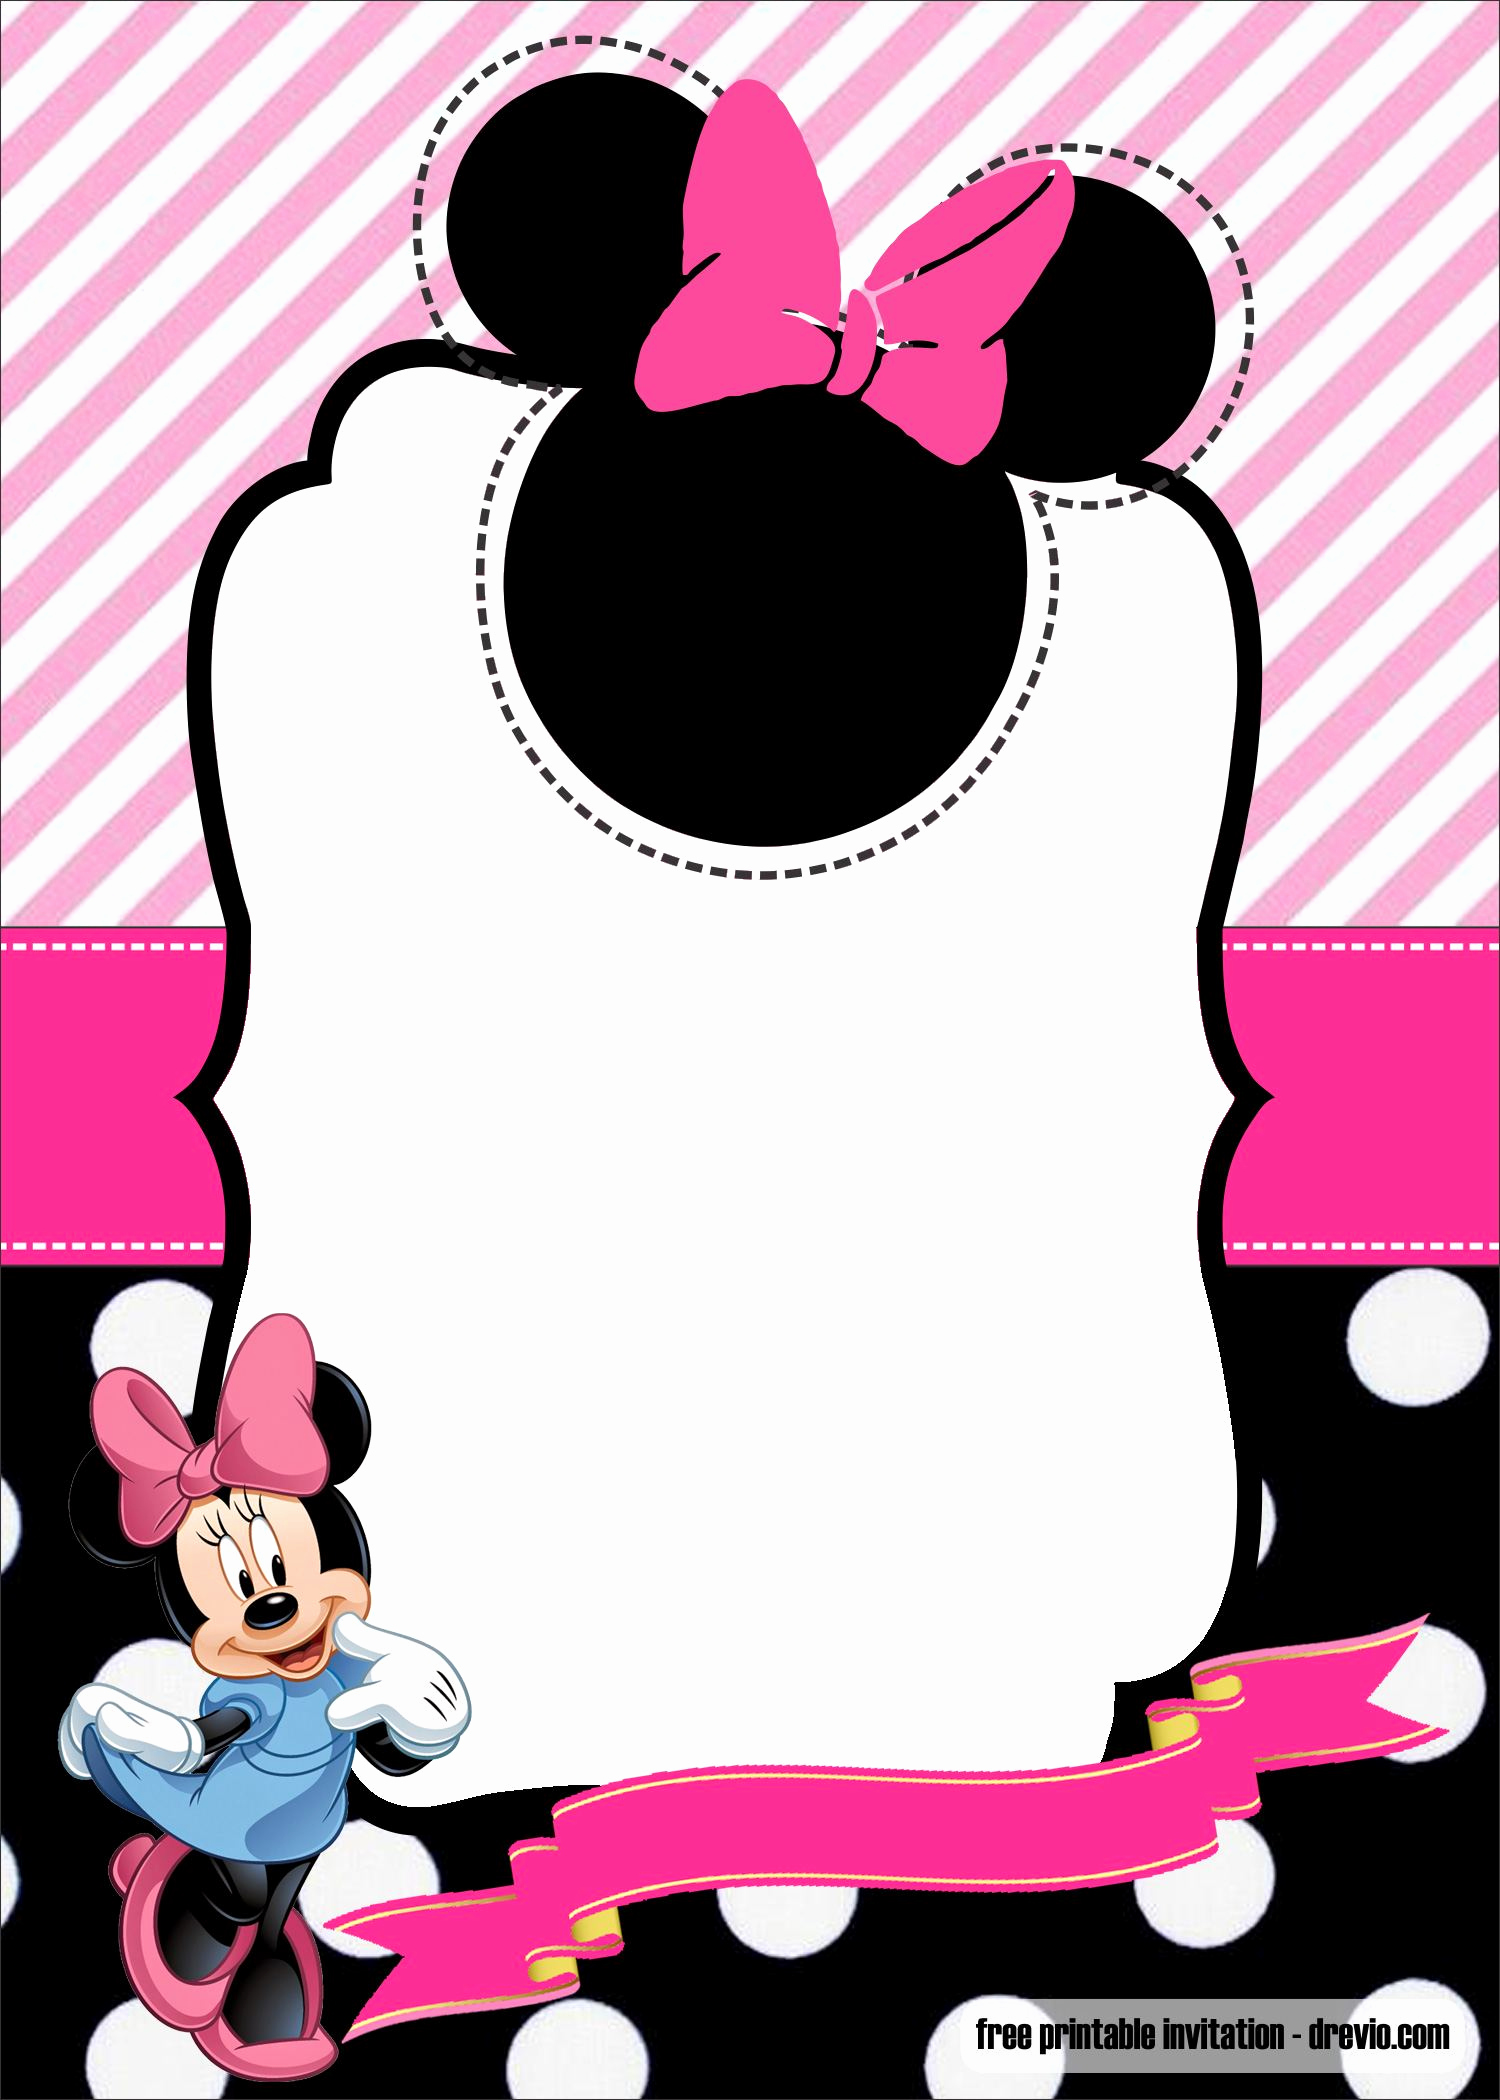 Minnie Mouse Invitation Template Free Best Of Free Minnie Mouse 1st Birthday Invitation Template